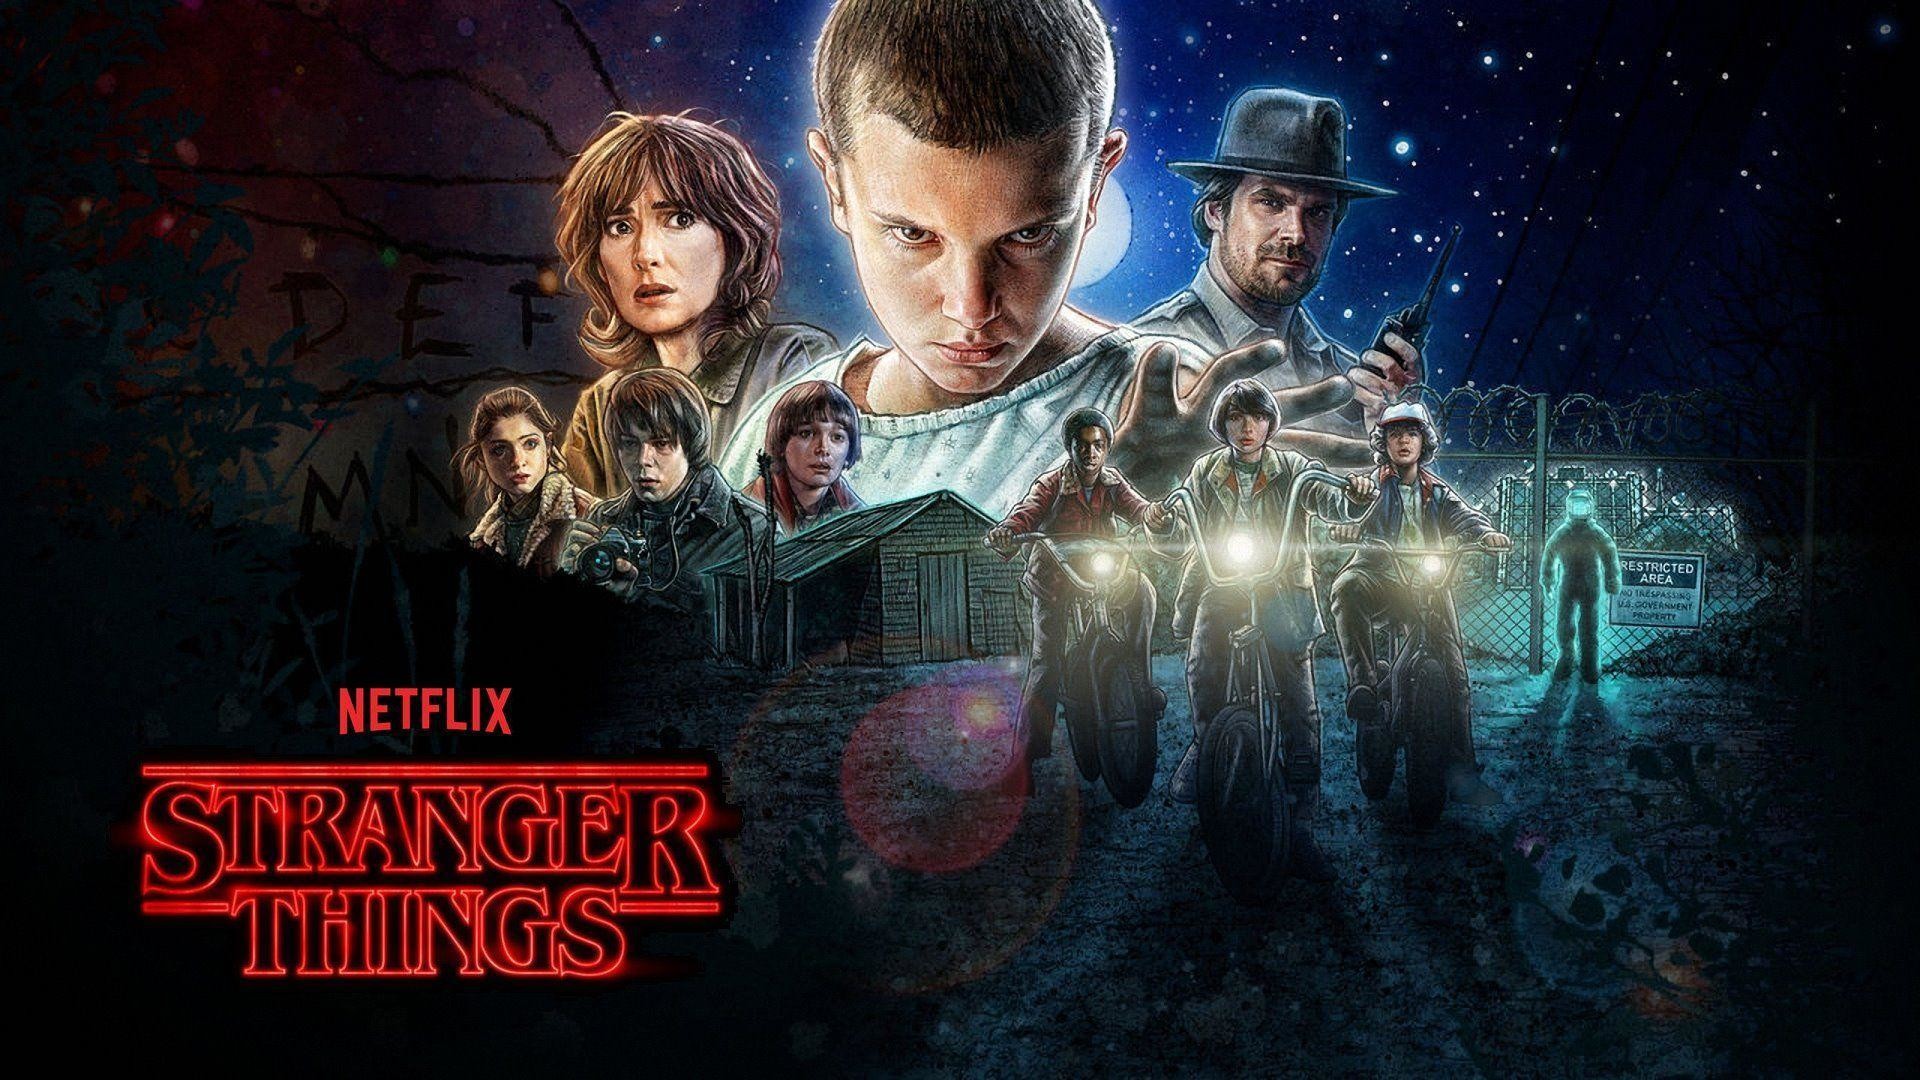 1920x1080 10 Stranger Things HD Wallpapers | Backgrounds - Wallpaper Abyss